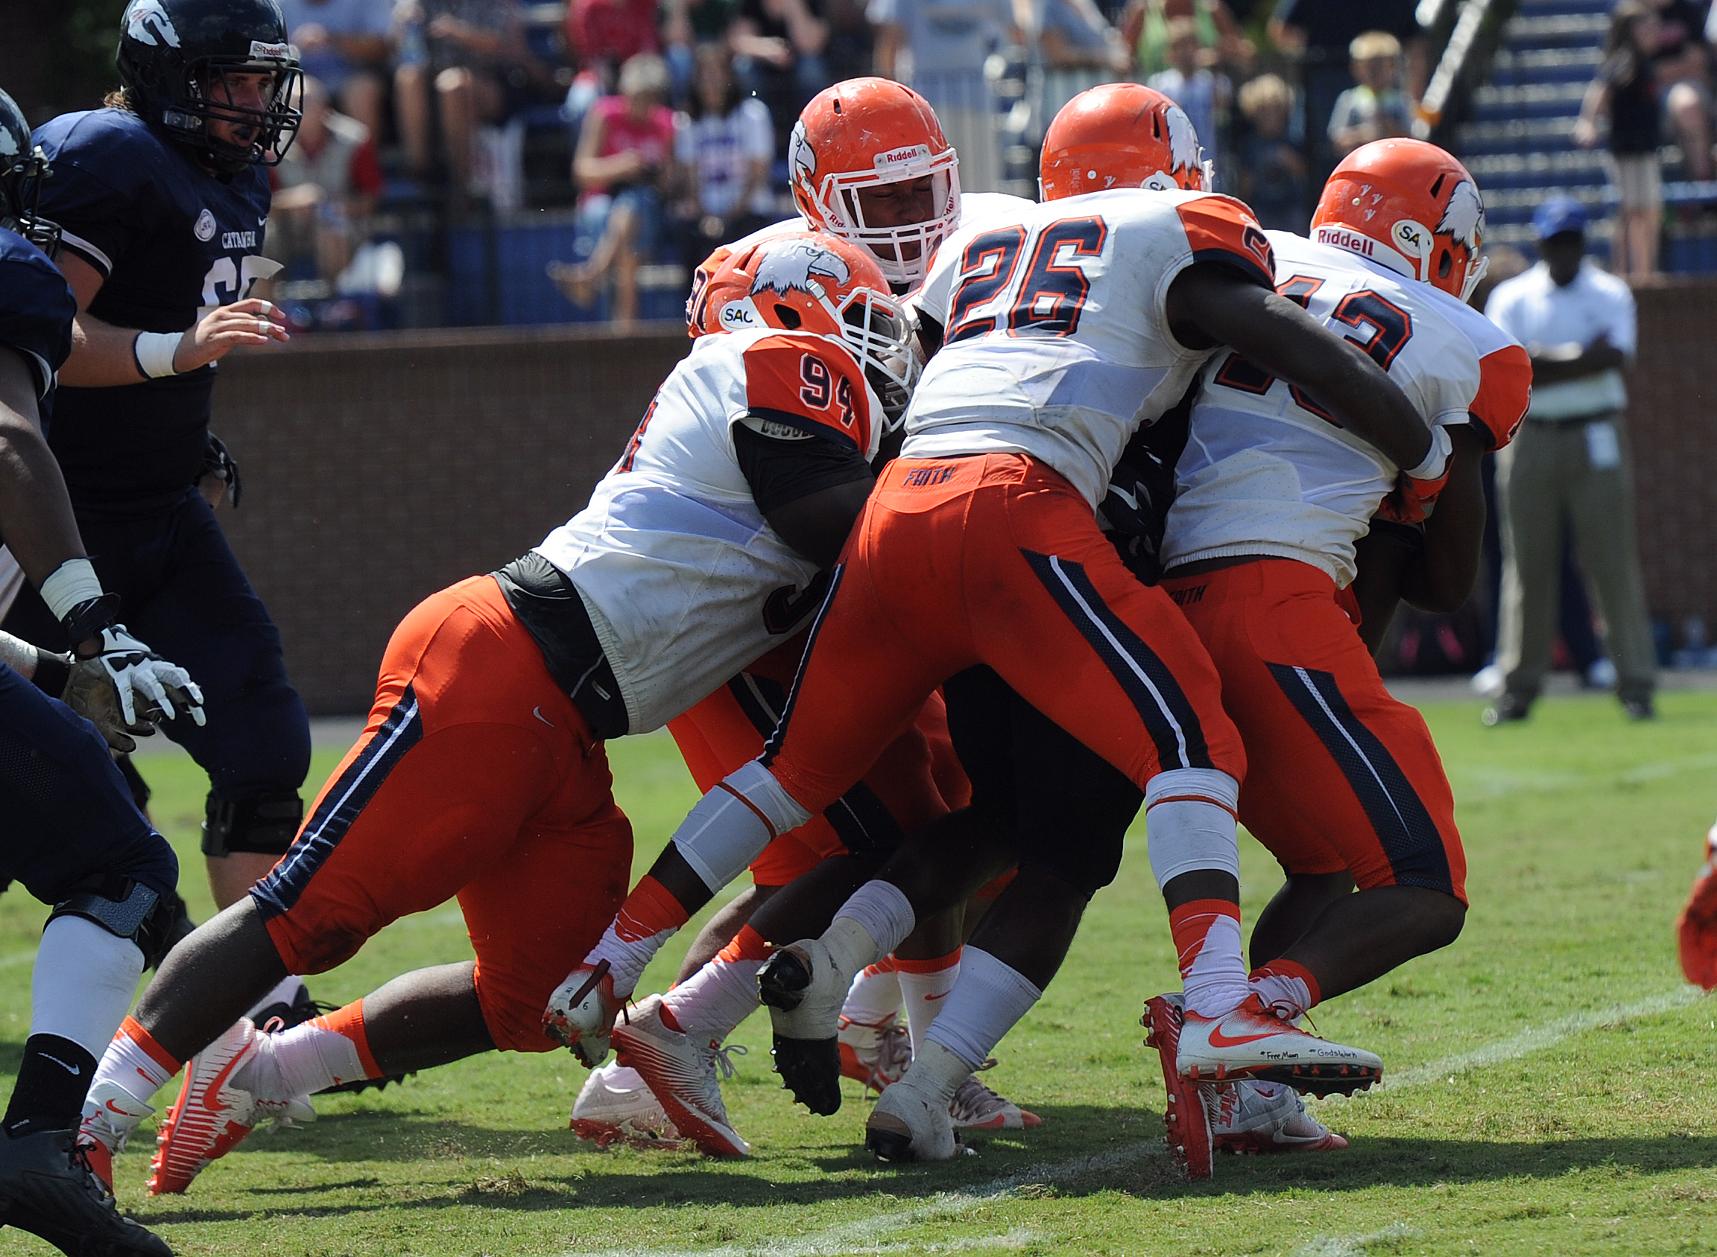 No. 23 Catawba invades The Creek for SAC clash with Carson-Newman